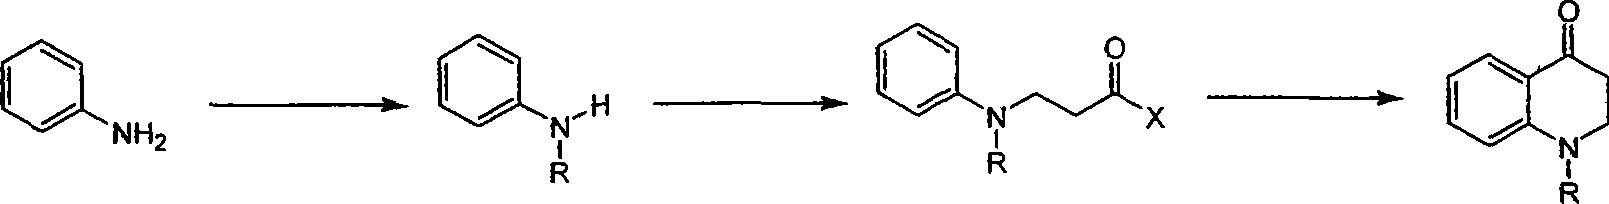 Synthesis of 1-R-2,3-dihydrogen-1H-quinoline-4-ketone